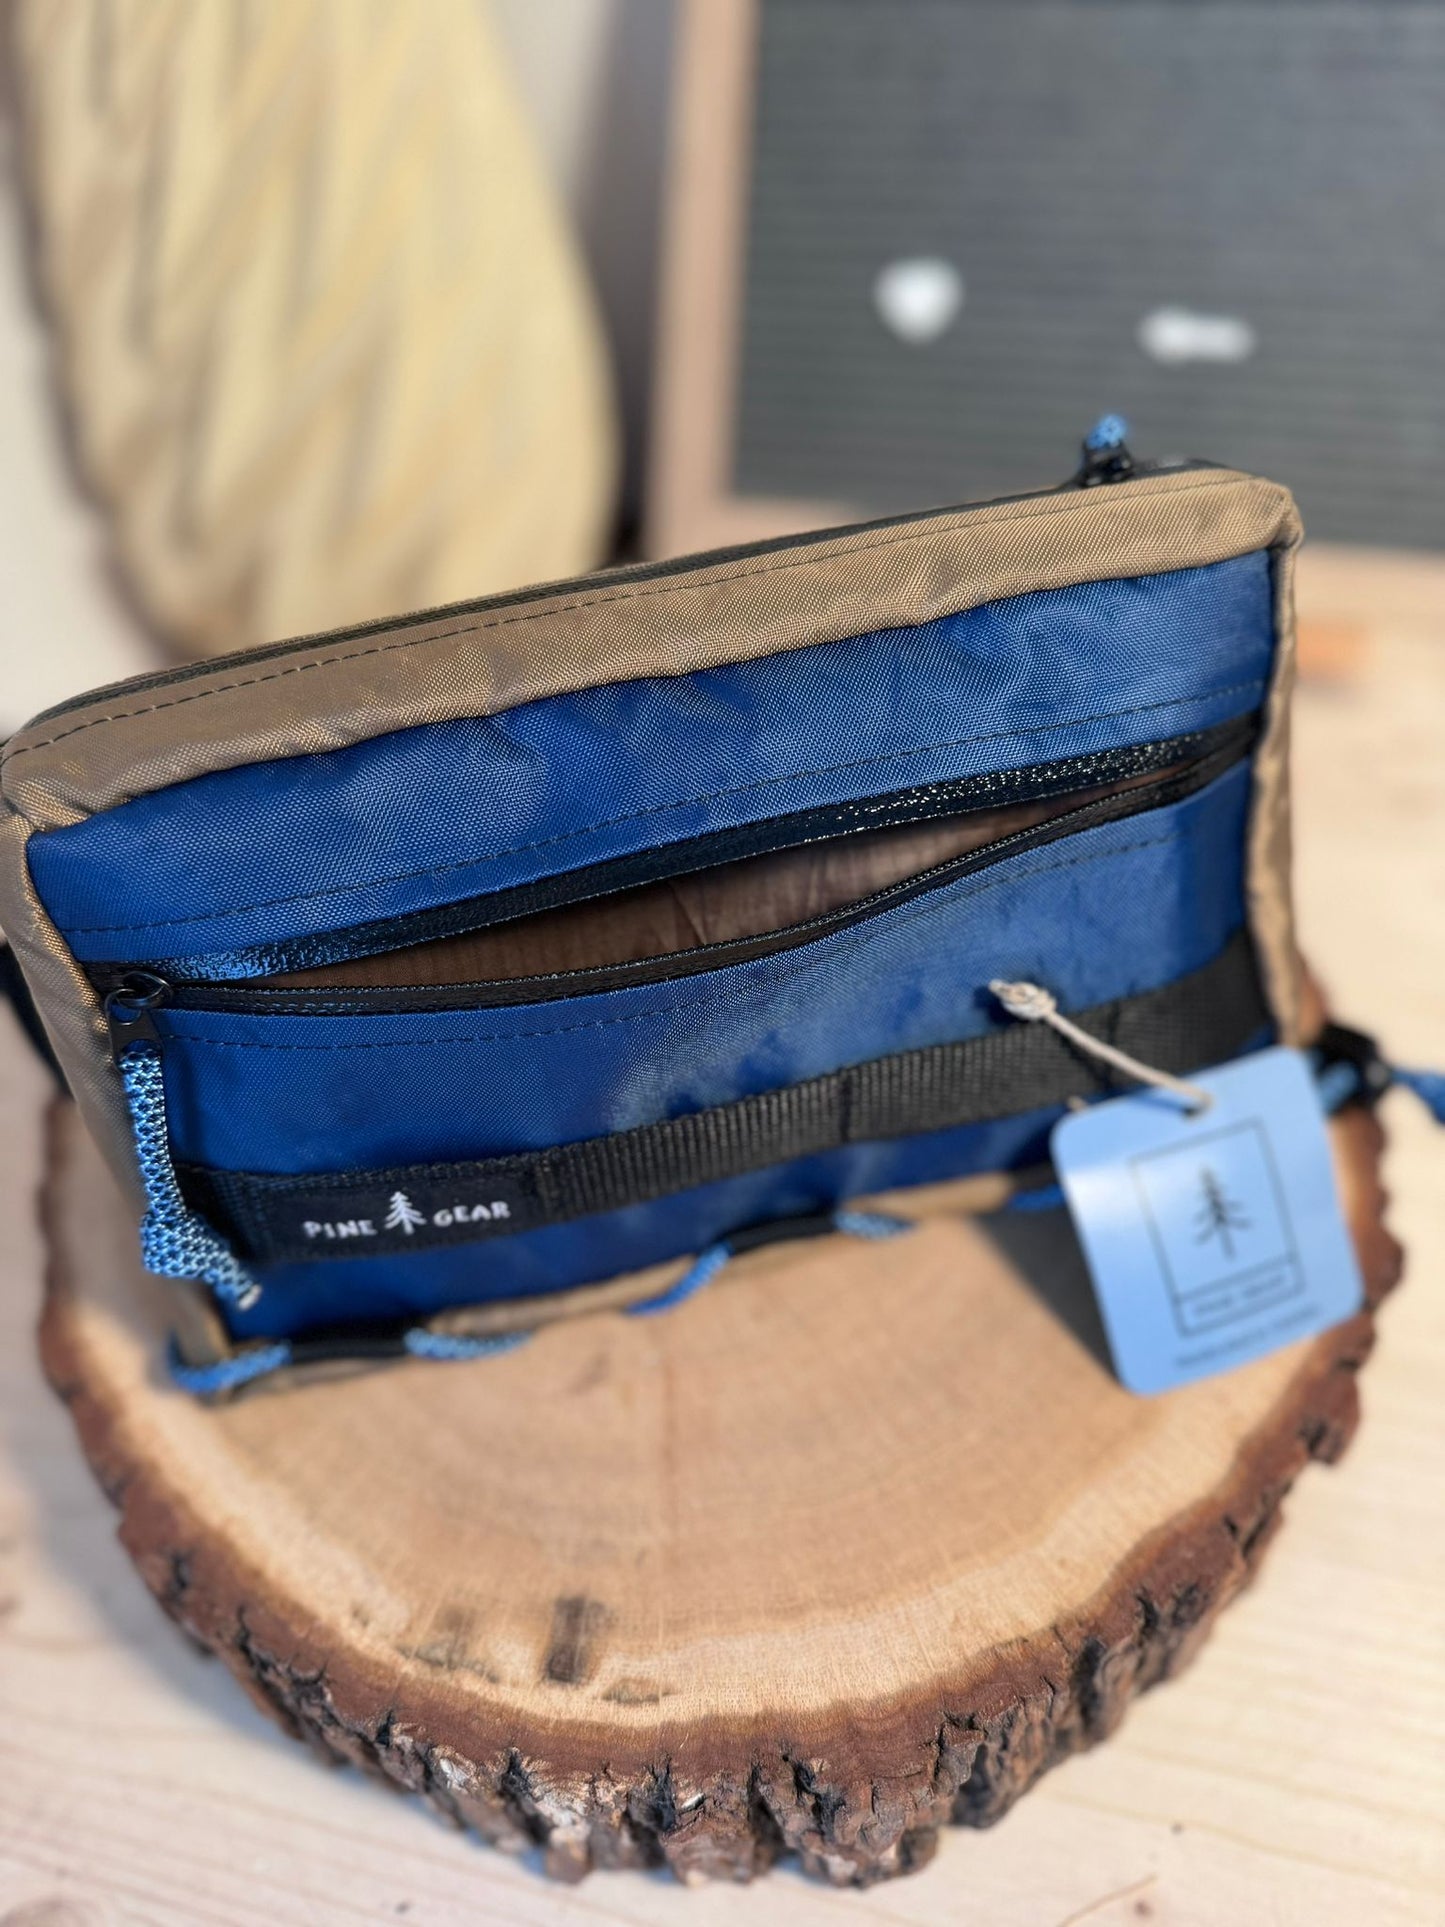 PINE GEAR - Dogpack blue/brown